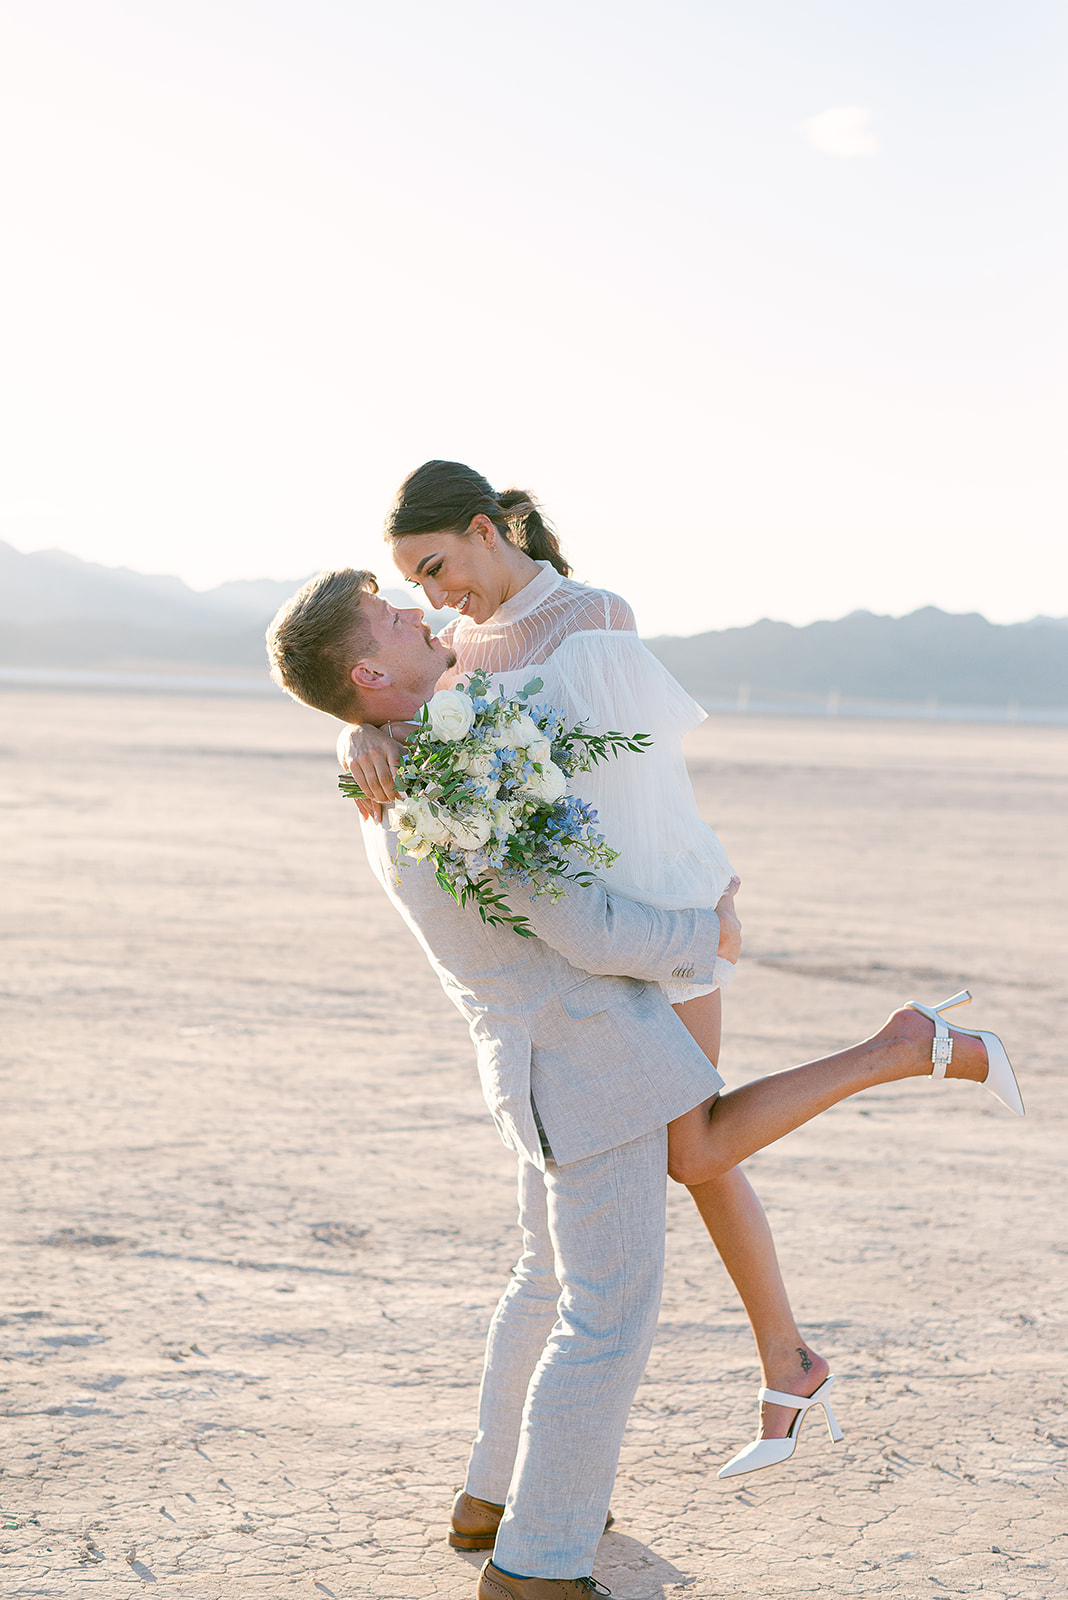 Groom lifts bride up as they smile at each other during their shoot organized by Elopement Las Vegas